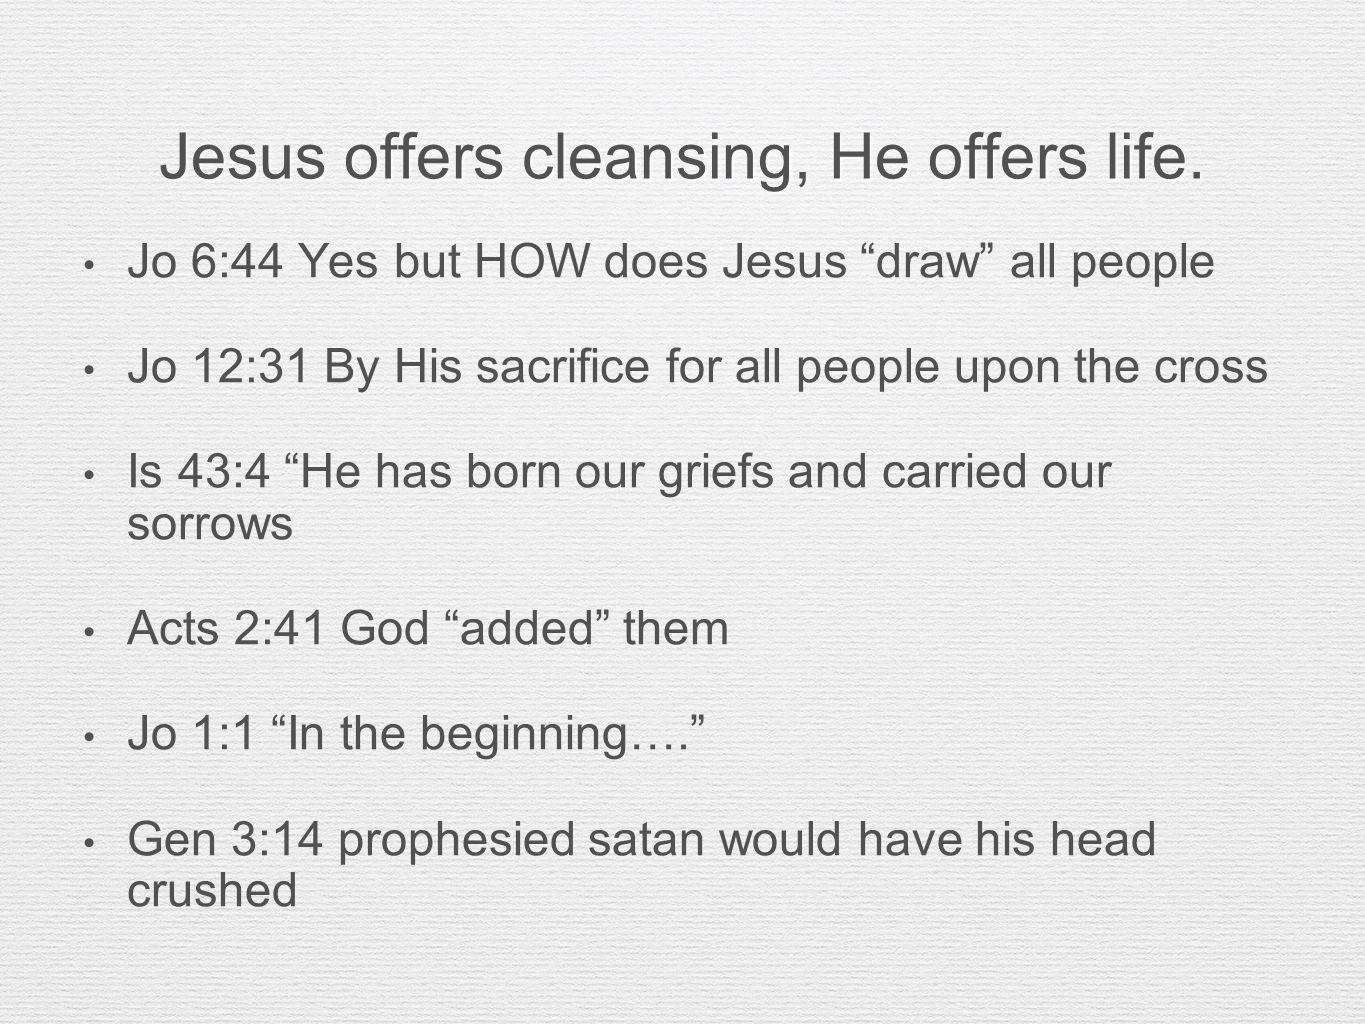 Jesus offers cleansing, He offers life.